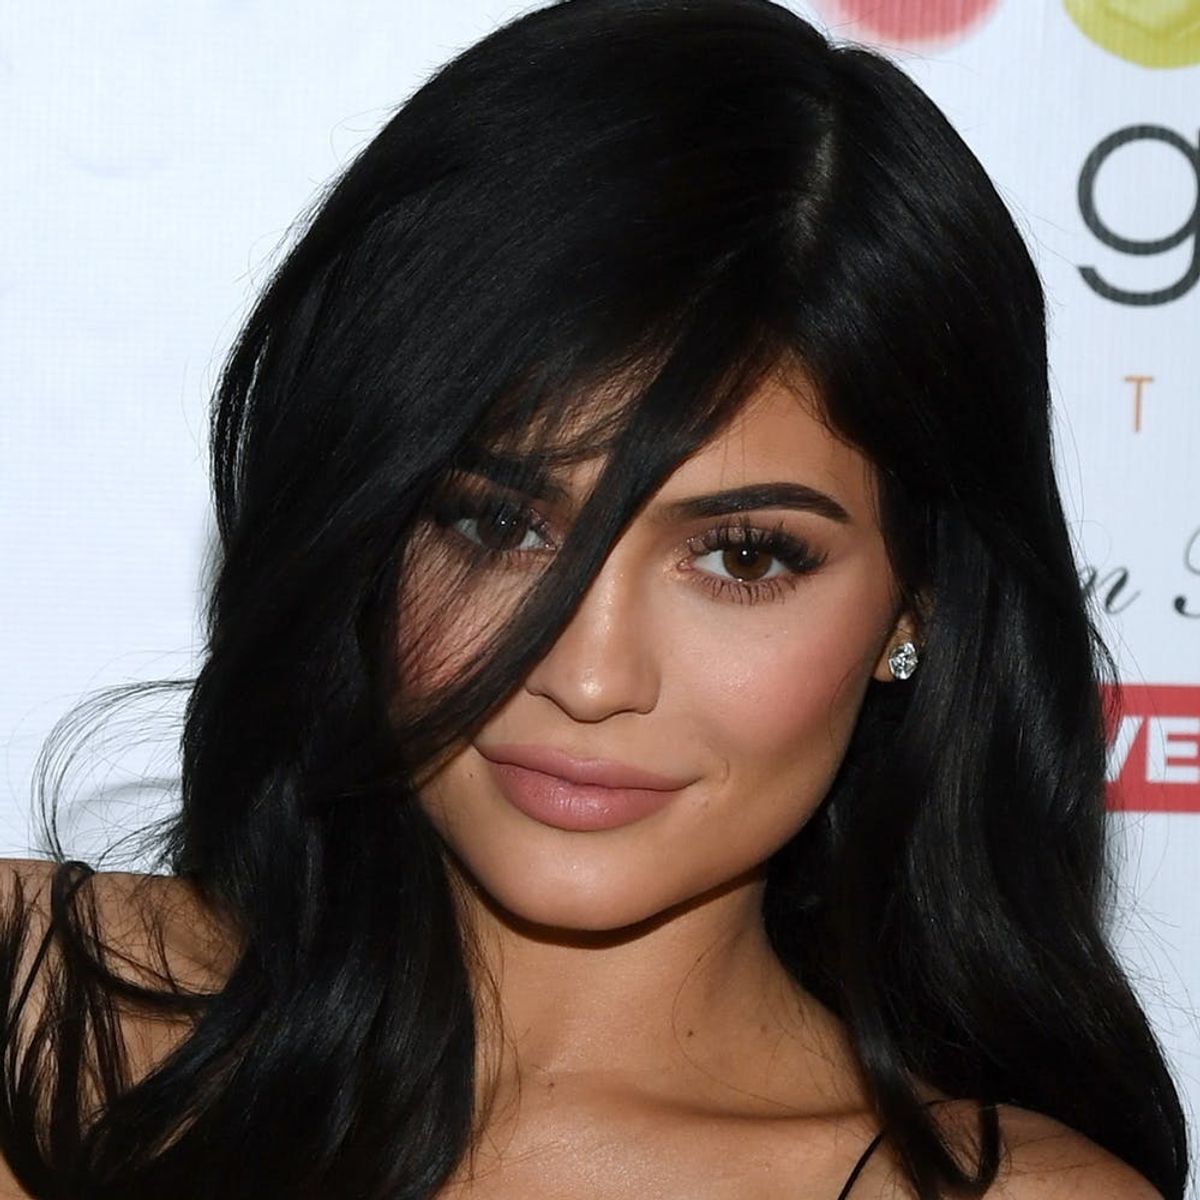 Here’s Why Fans Think Kylie Jenner’s Been Dropping Pregnancy Hints on Social Media